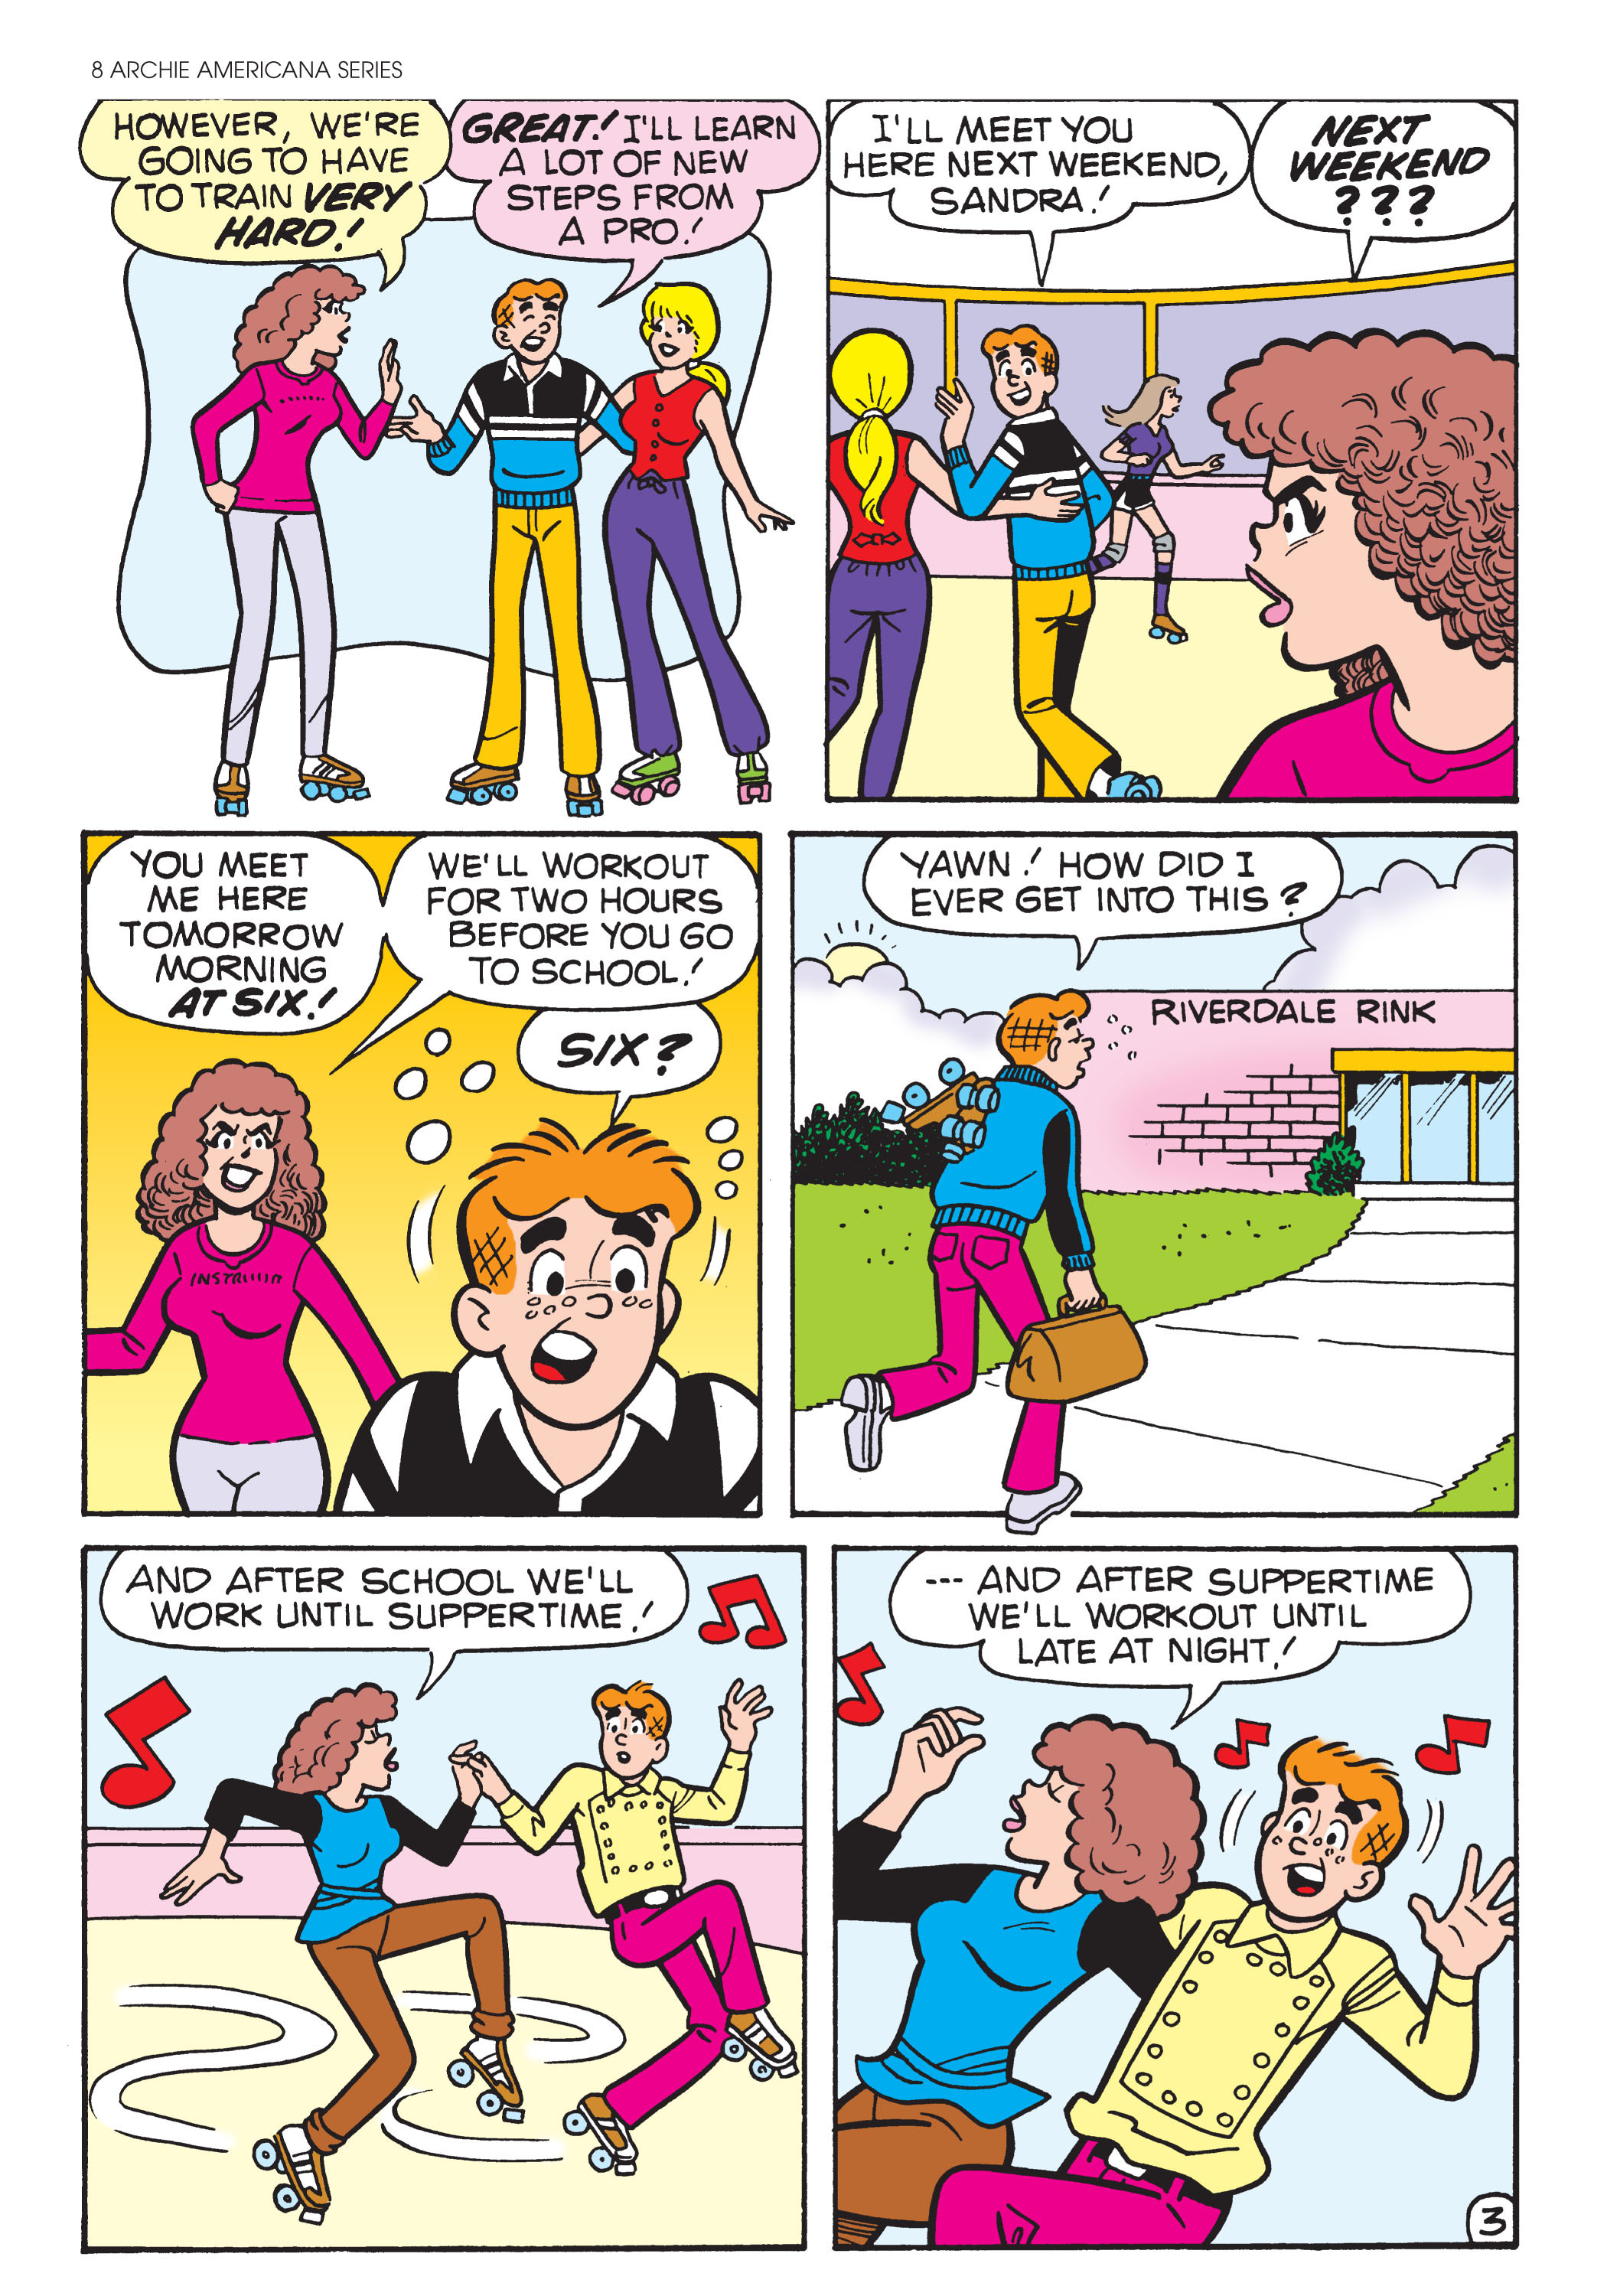 Read online Archie Americana Series comic -  Issue # TPB 5 - 10